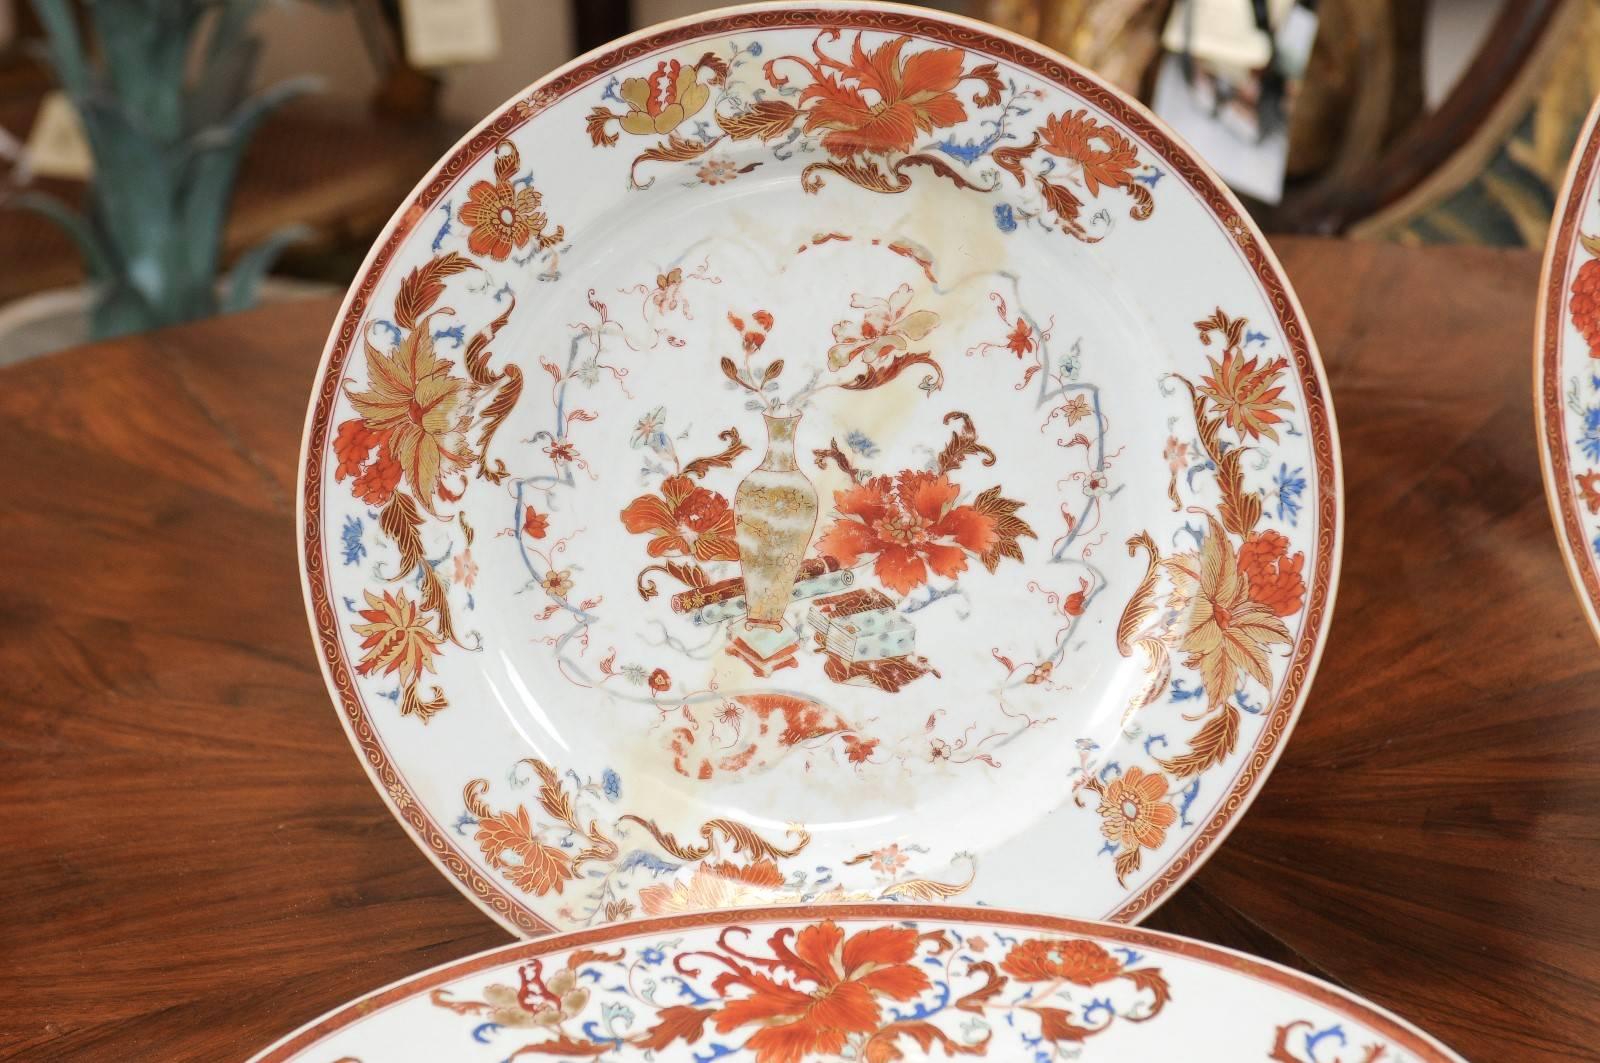 Set of 4 18th Century Chinese Export Imari Porcelain Chargers in 2 Sizes For Sale 2